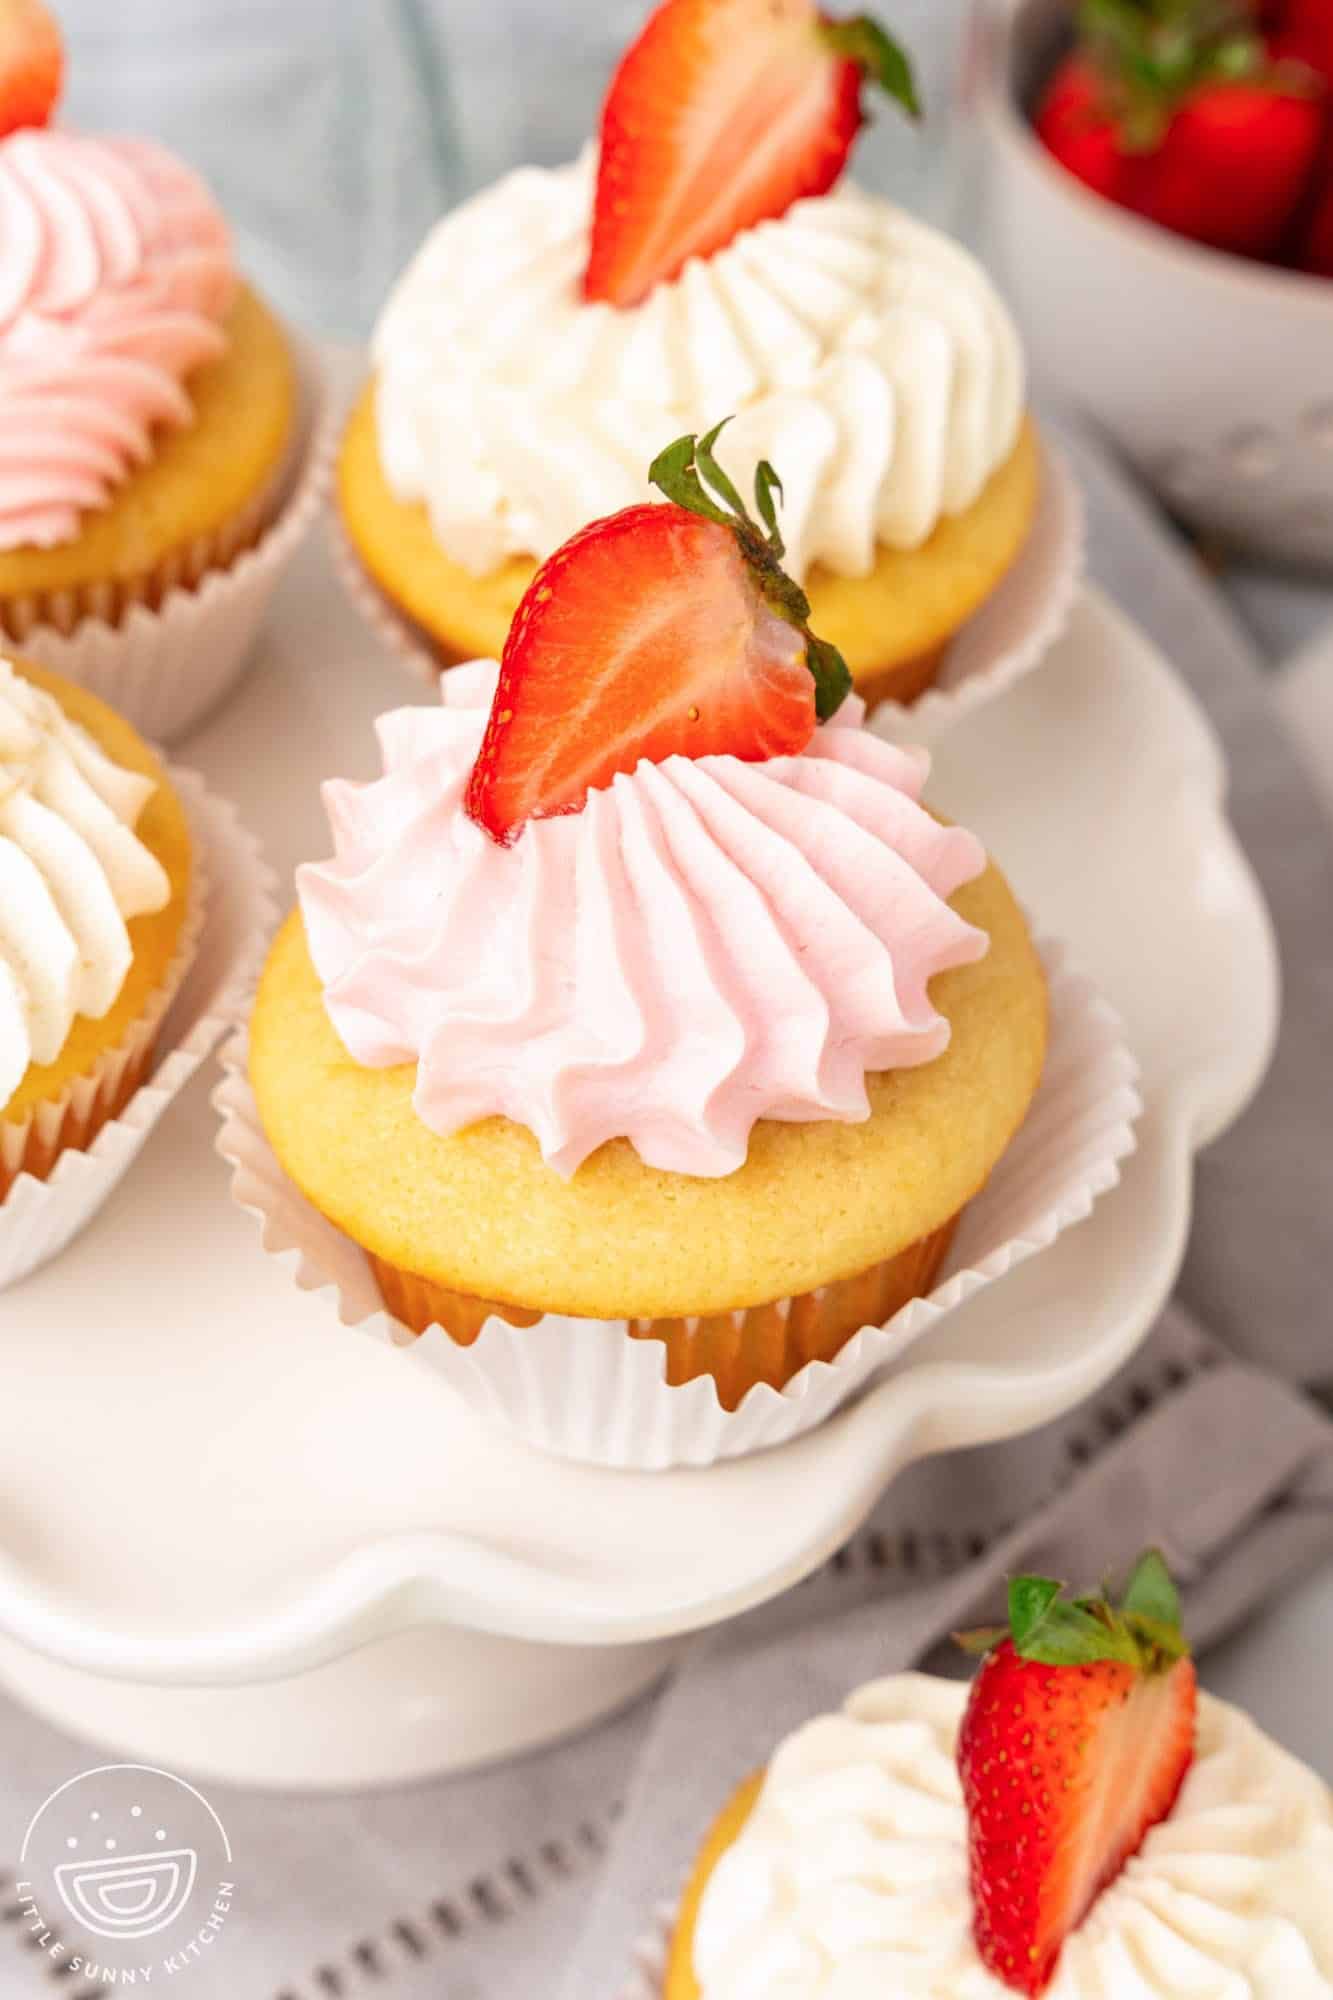 Vanilla cupcakes with pink fluffy frosting, each topped with a half strawberry. 4 Cupcakes are arranged on a small pedestal.